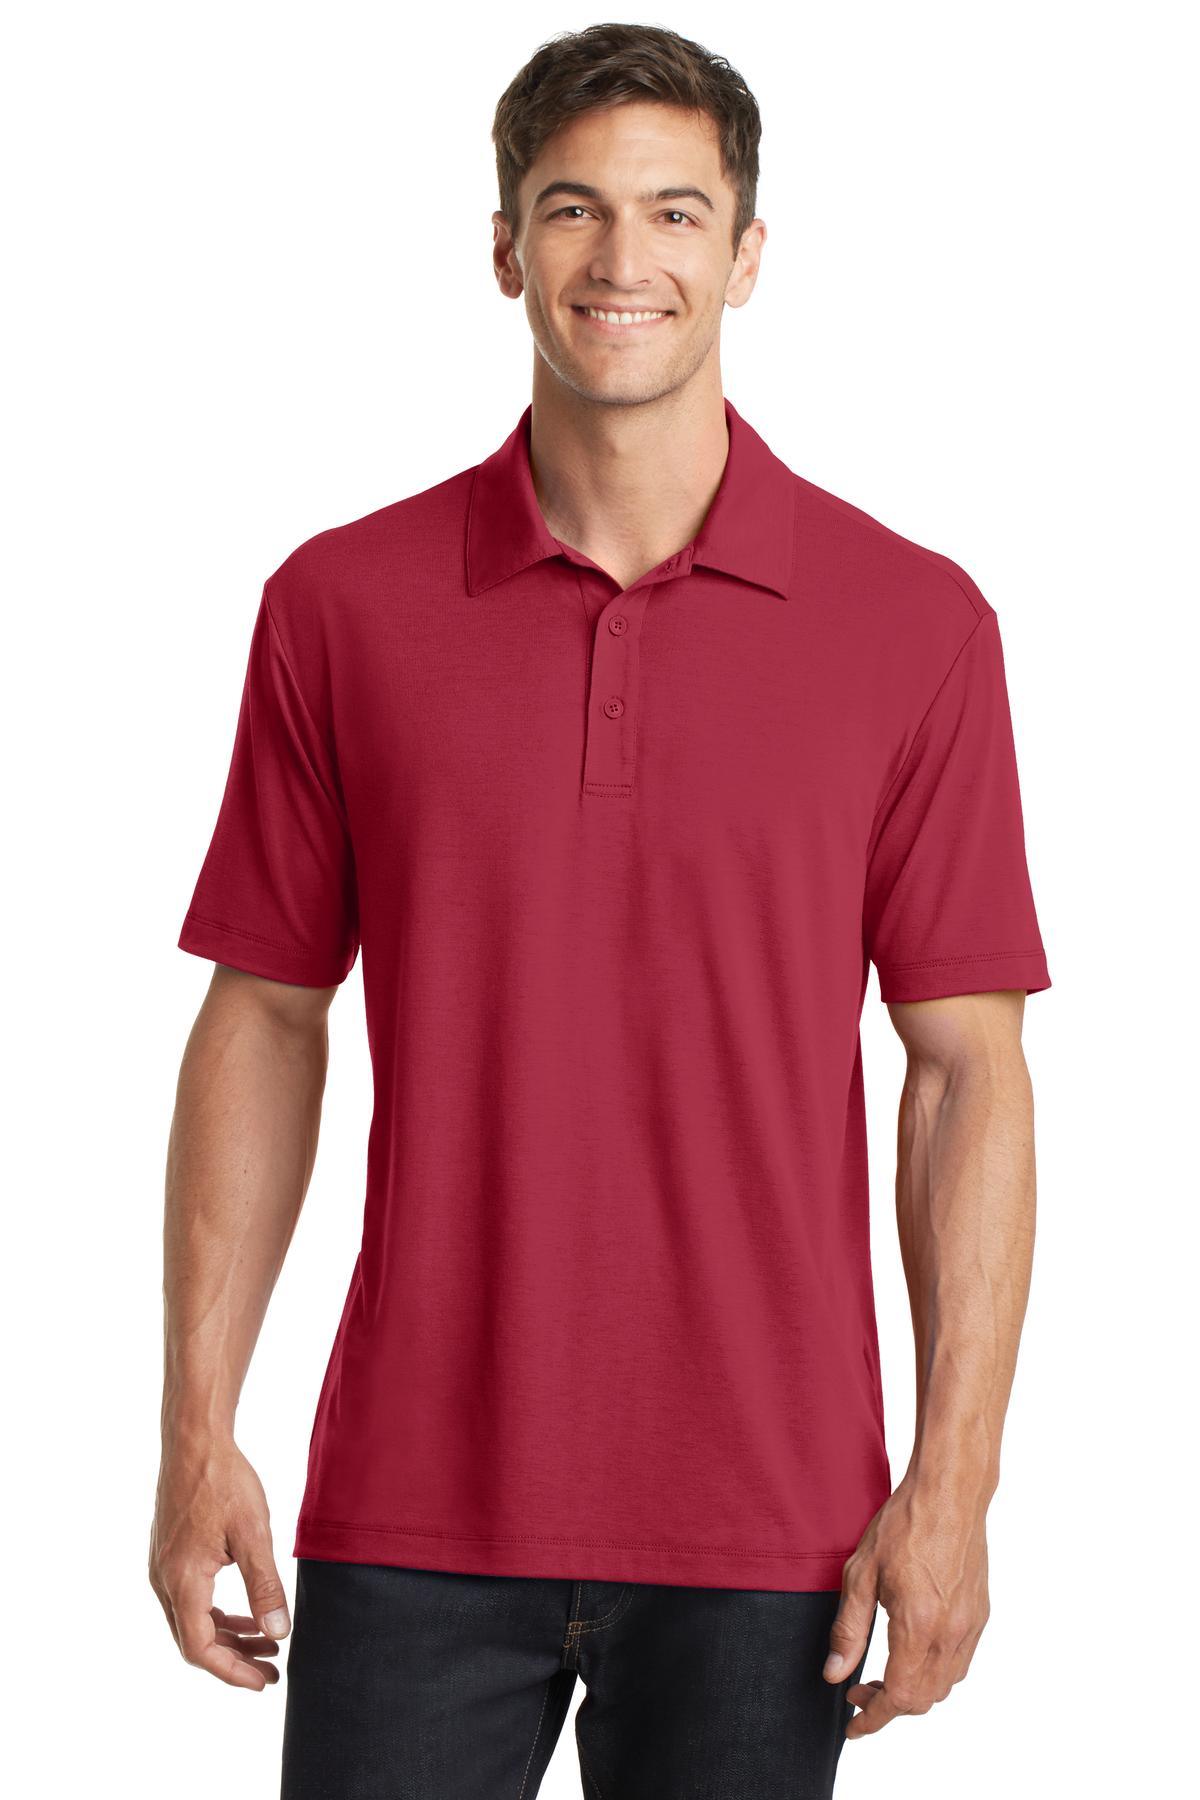 Port Authority Cotton Touch Performance Polo. K568 - Dresses Max